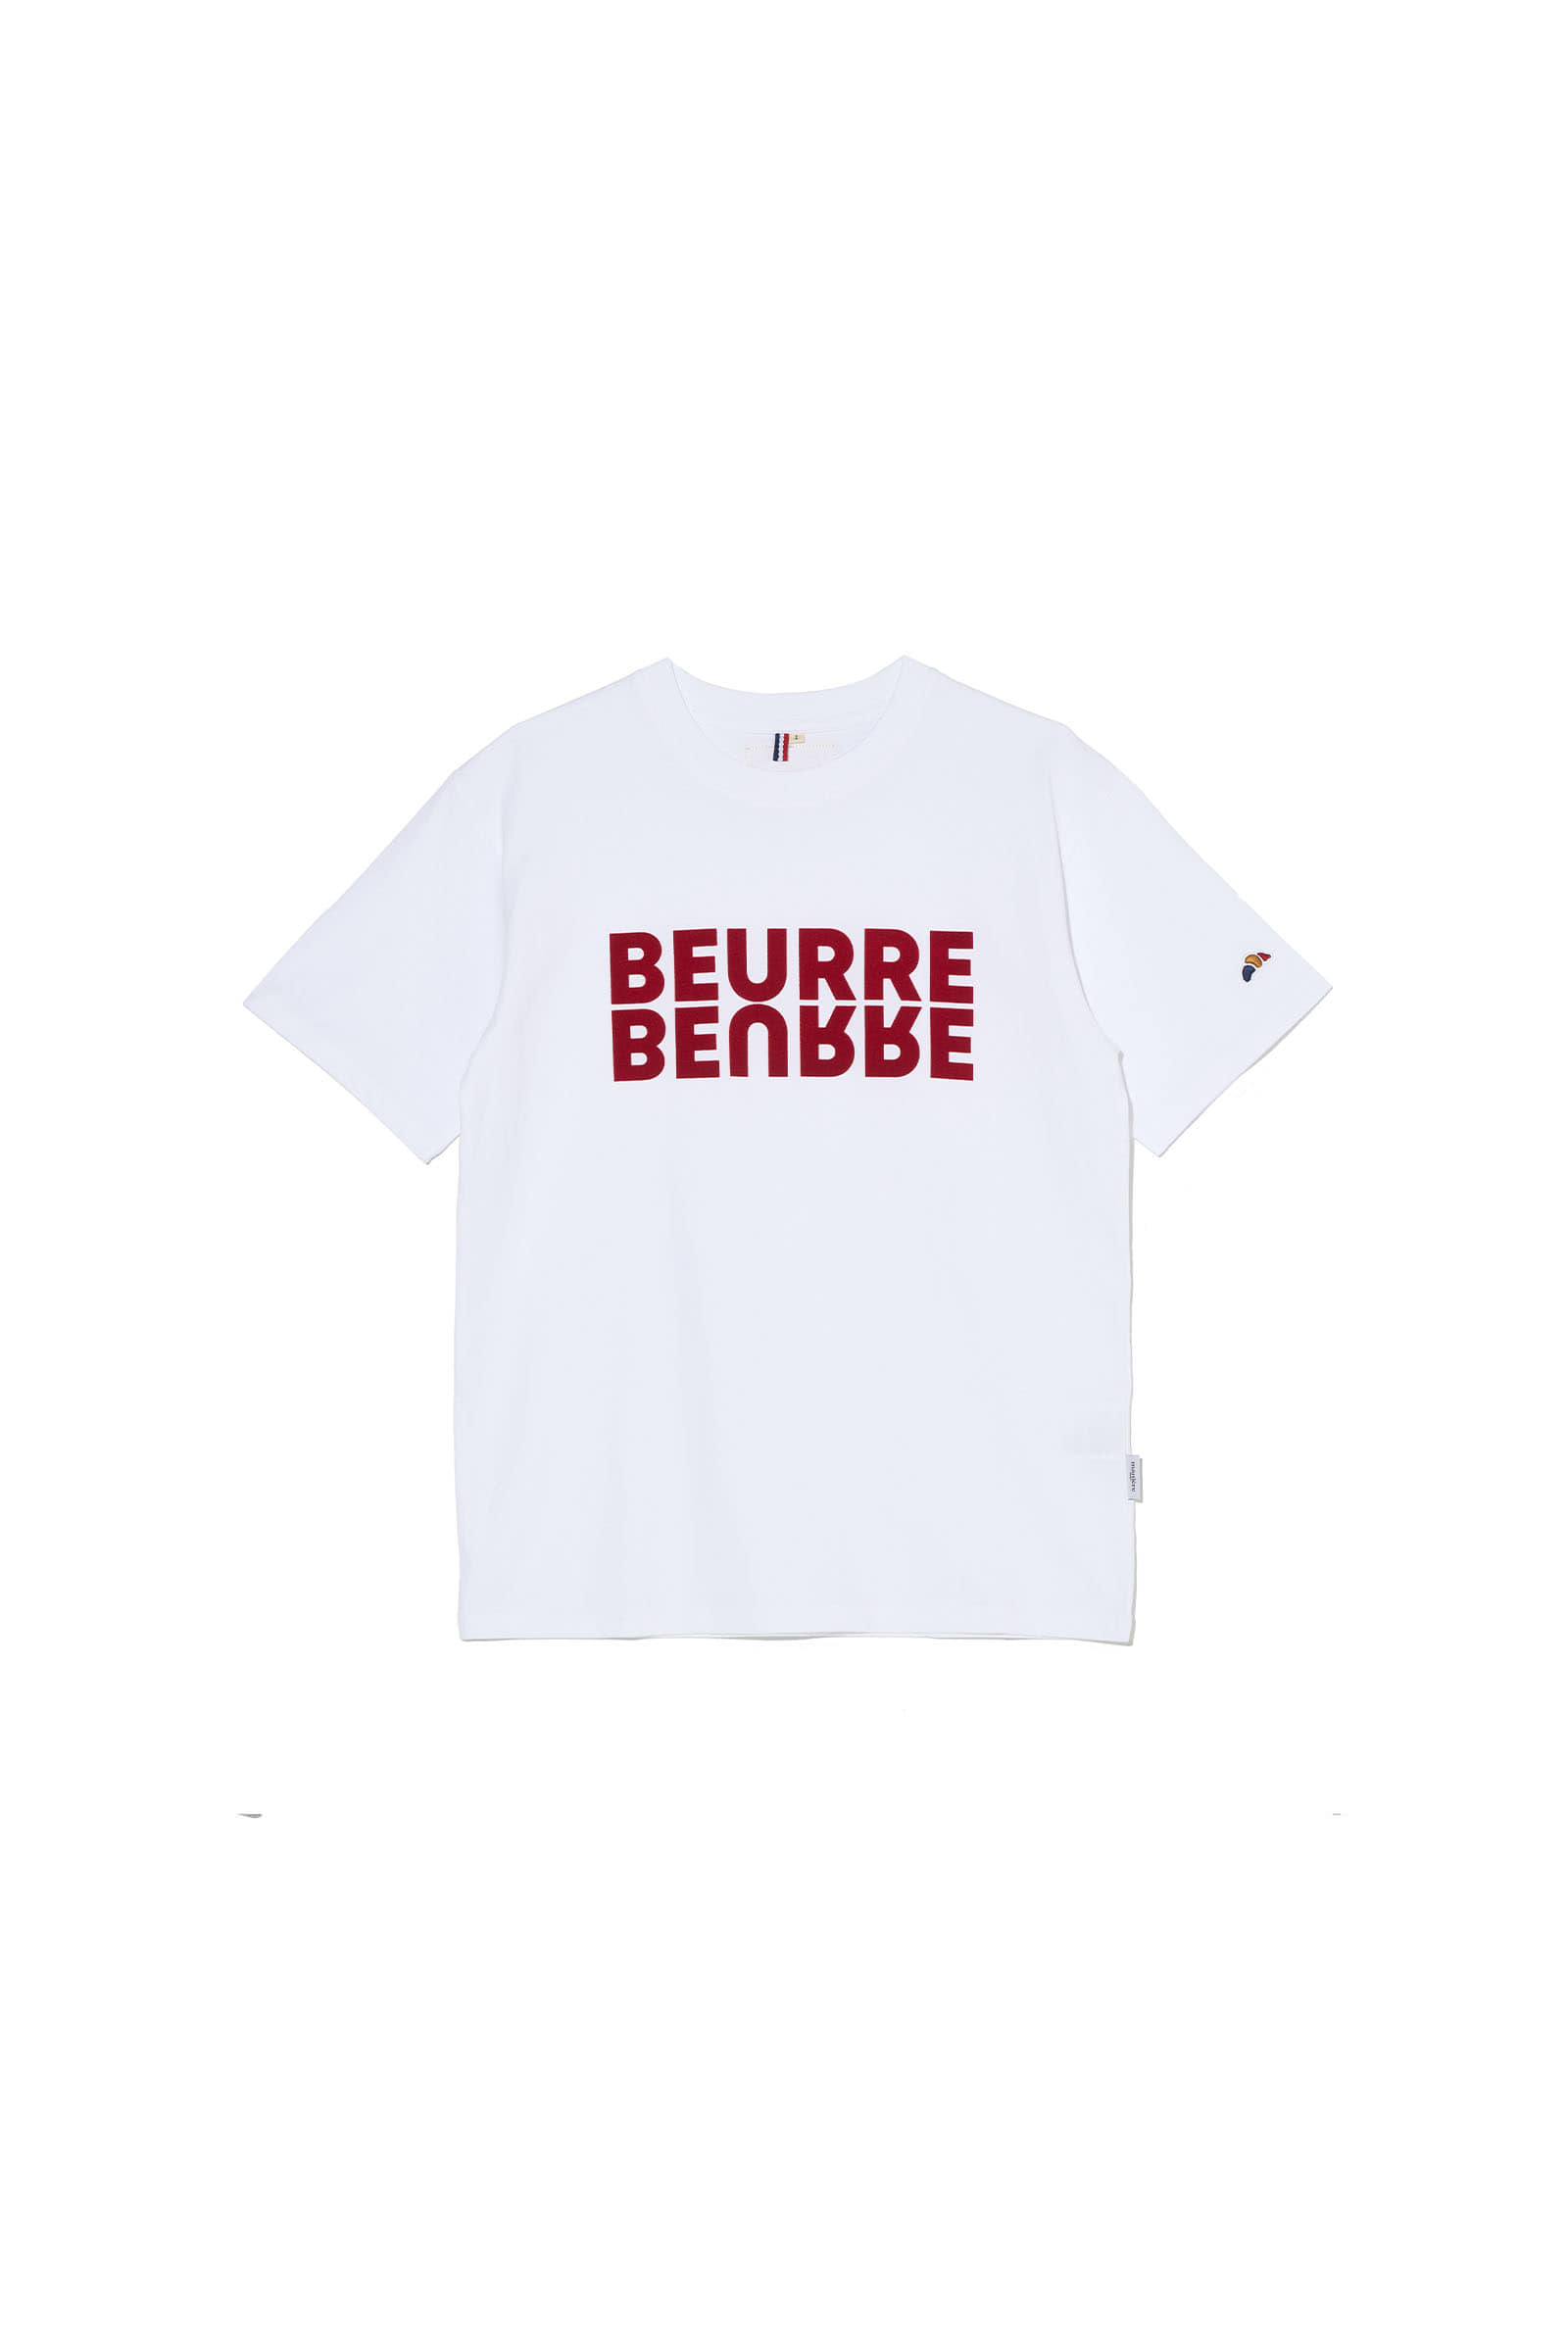 ep.6 BEURRE Decalcomanie T-shirts (White)